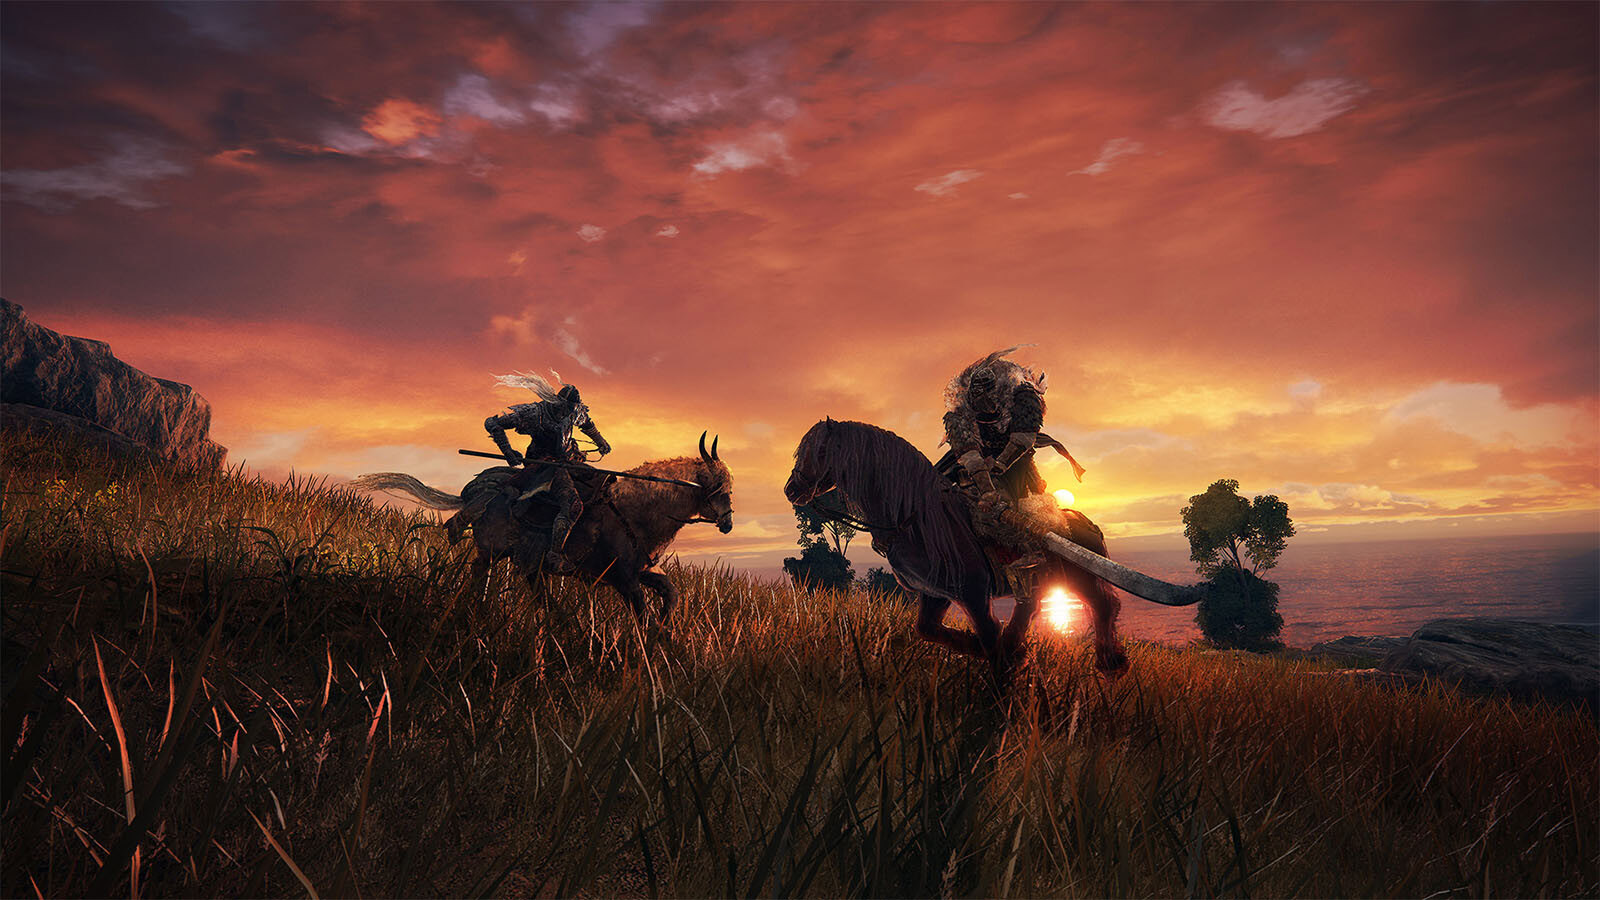 An image of two warriors fighting on horseback while the sun sets behind them.